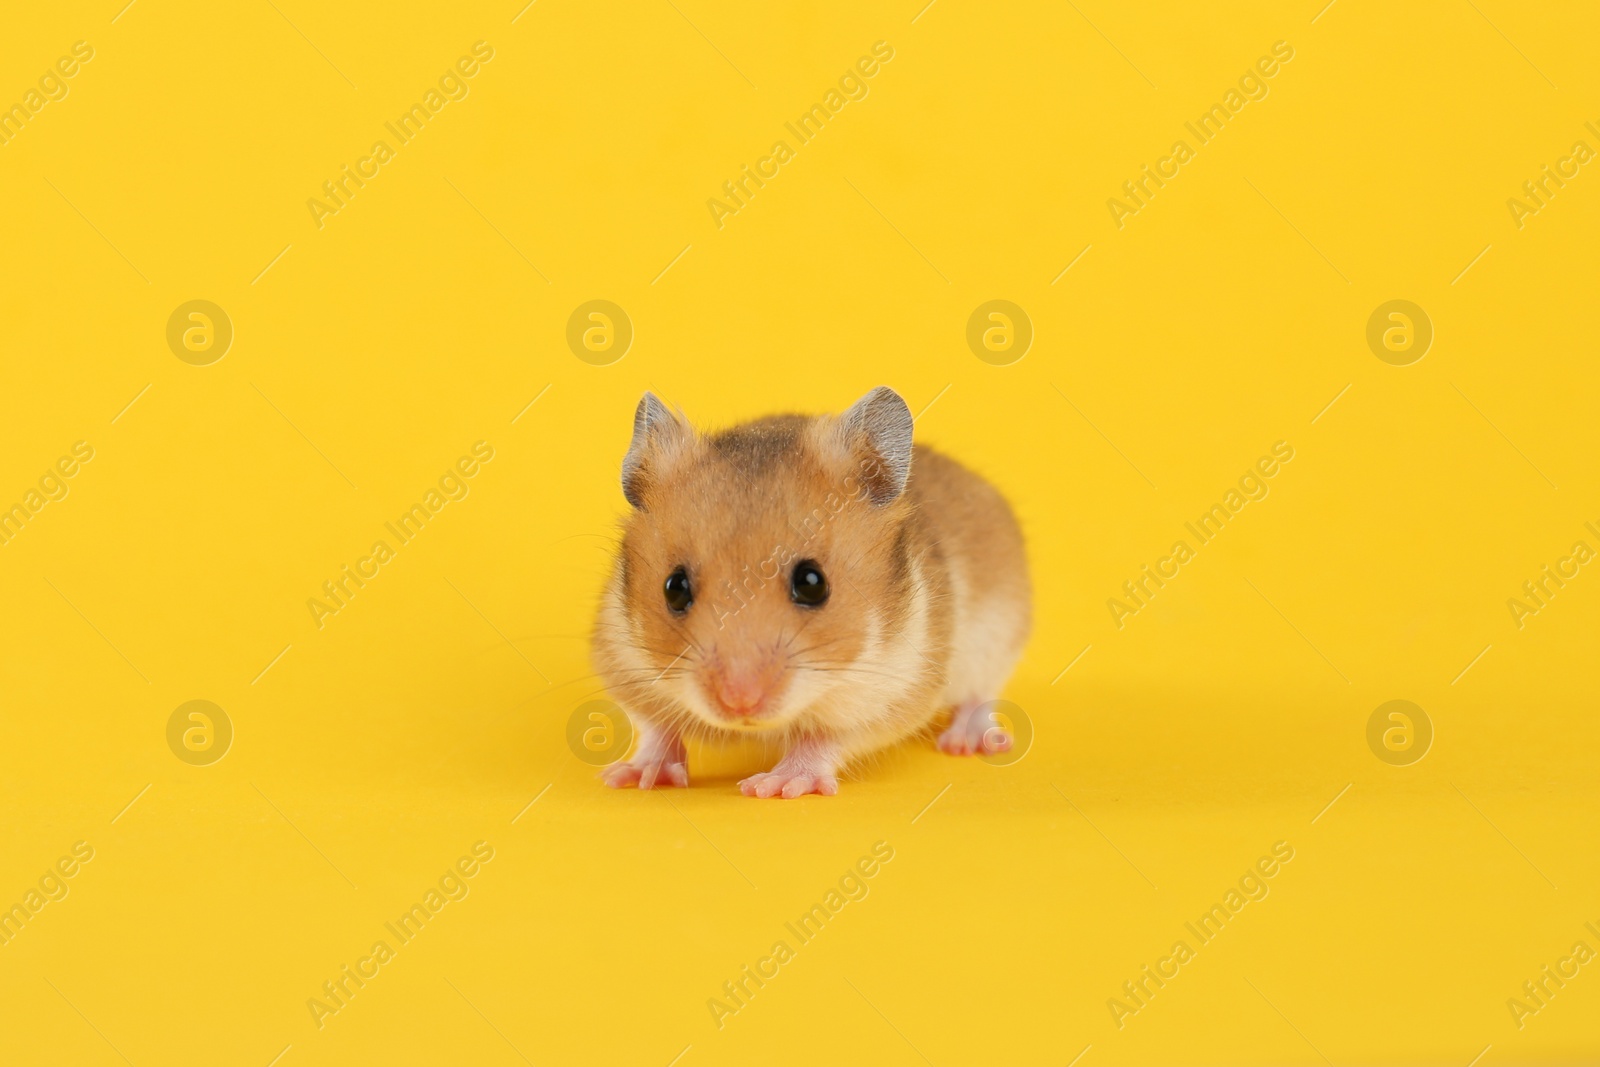 Photo of Cute little fluffy hamster on yellow background